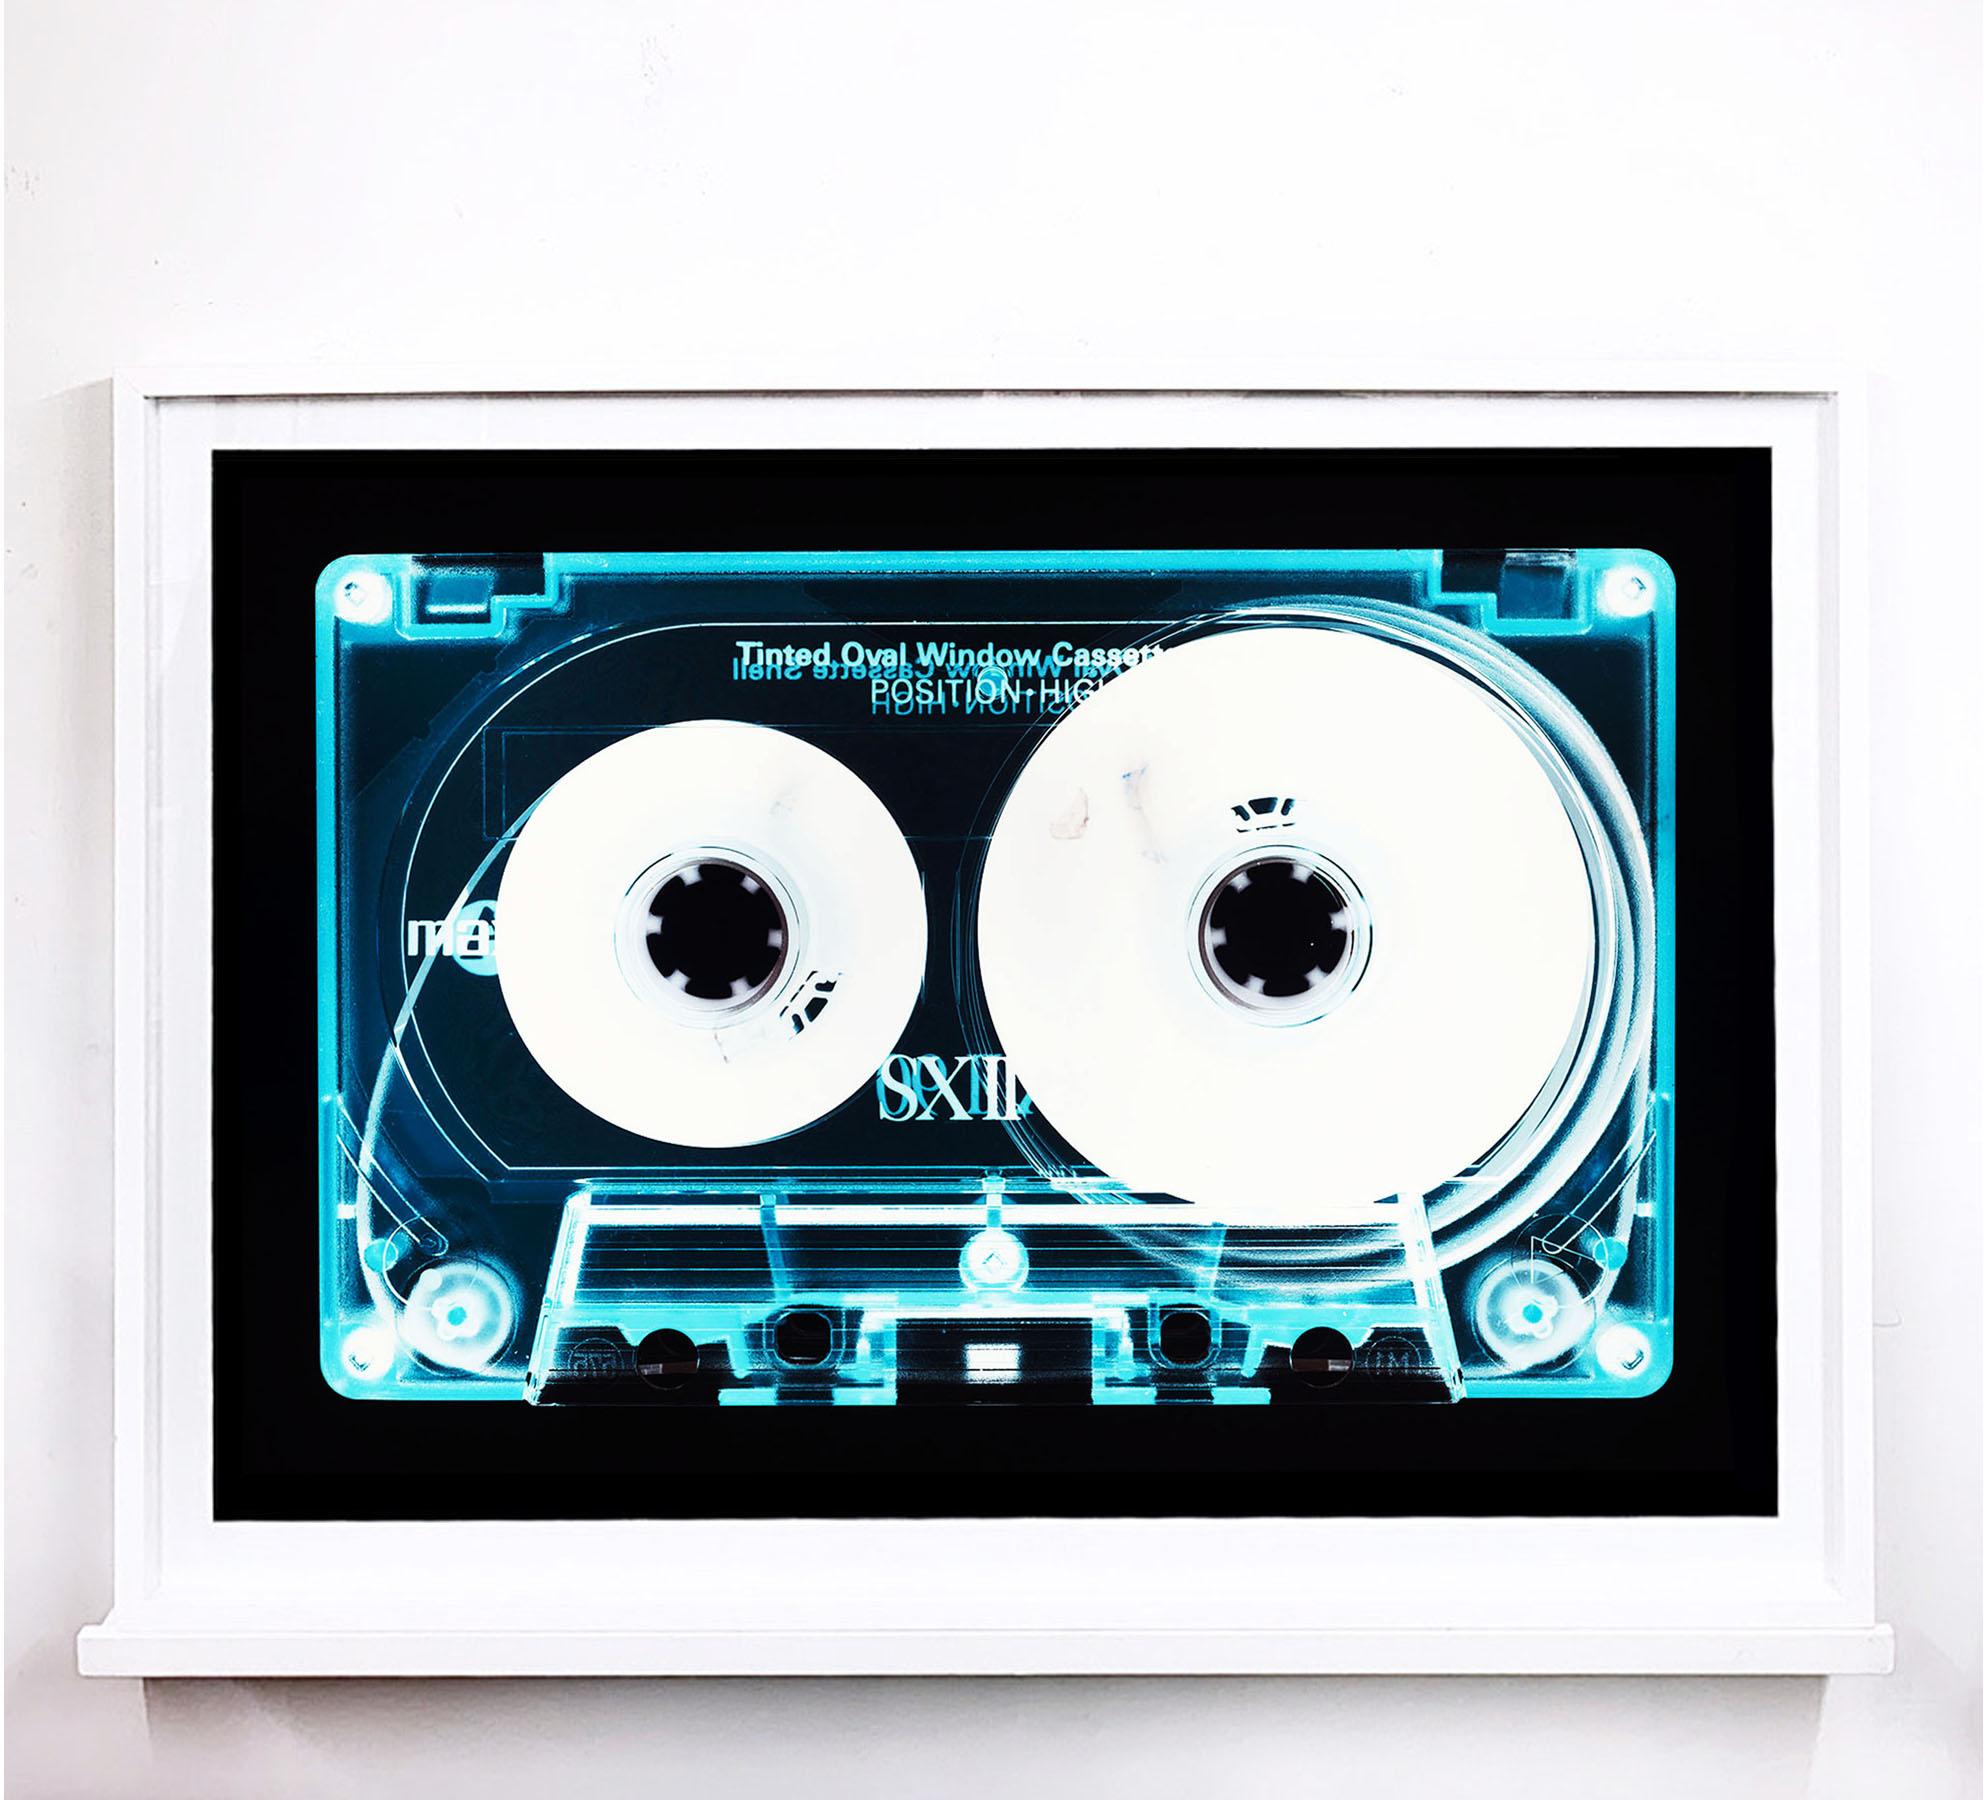 Tape Collection, Tinted Oval Window Cassette - Contemporary Pop Art Color Photo - Gray Color Photograph by Heidler & Heeps